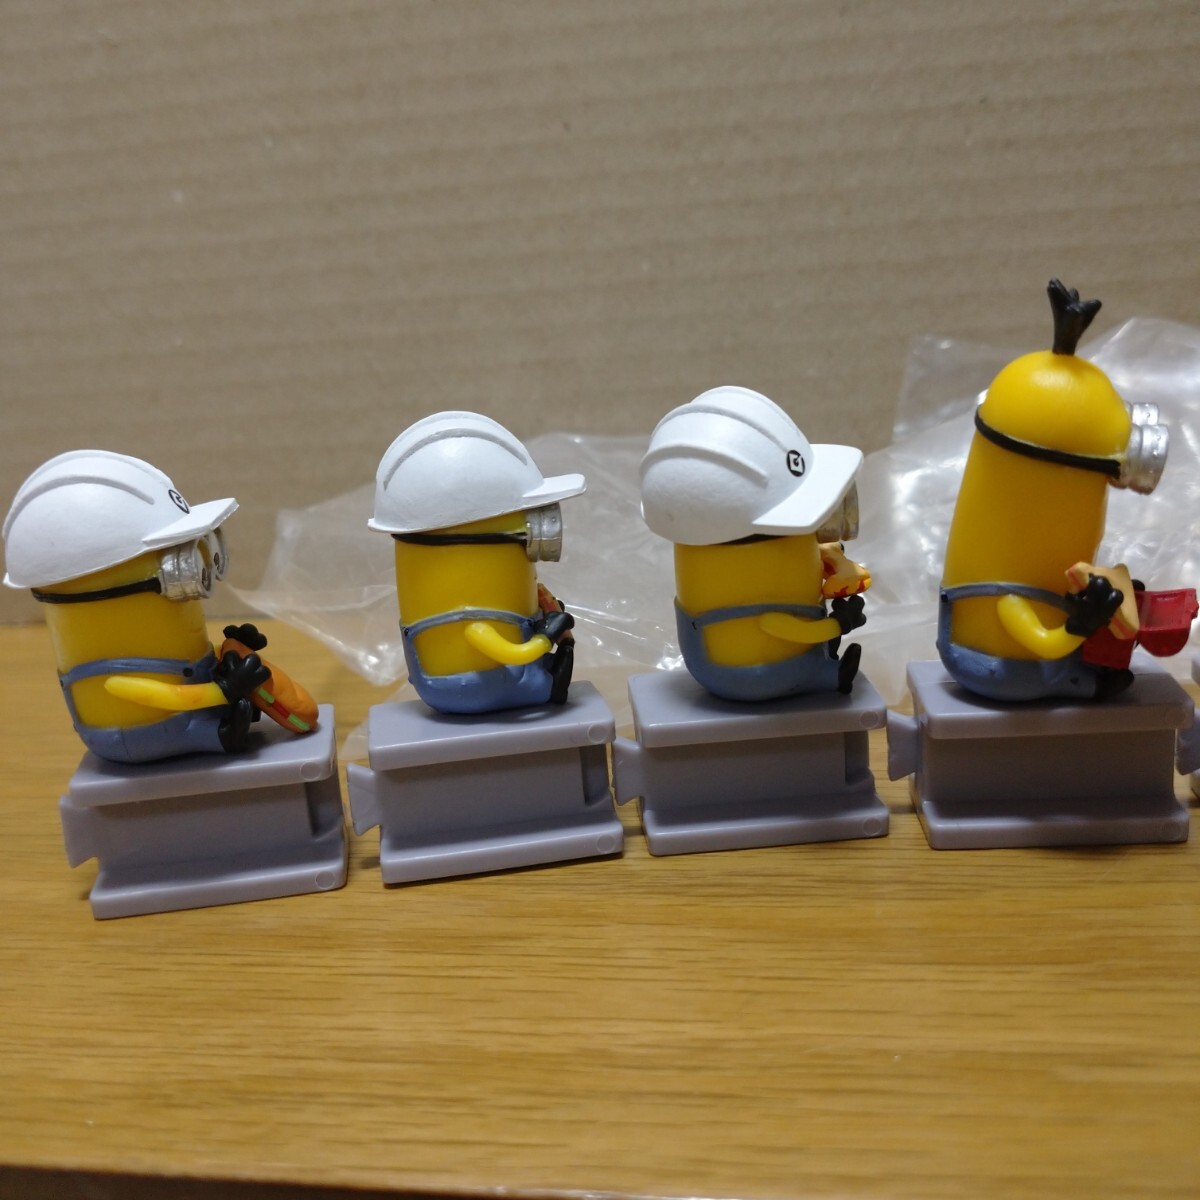 minions minion 工事現場 工事 工場 作業員 フィギュア コレクション ミニオンズ ミニオン パン ご飯 collection toy lunch time figureの画像7